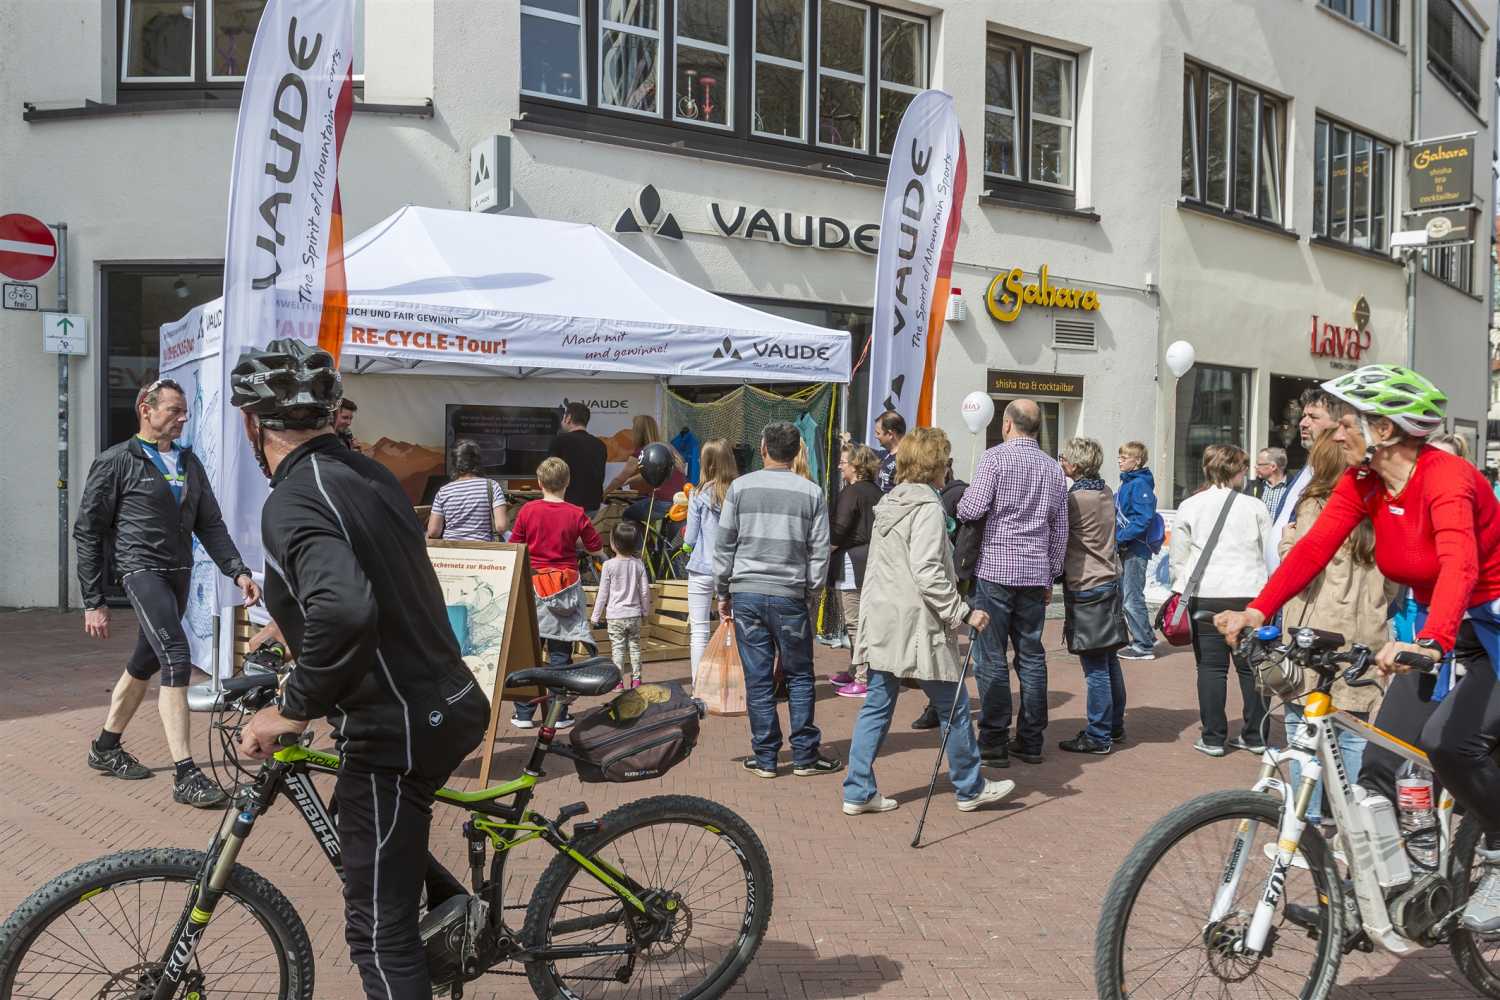 VAUDE_Recycle Tour_Store Ulm_05A8835